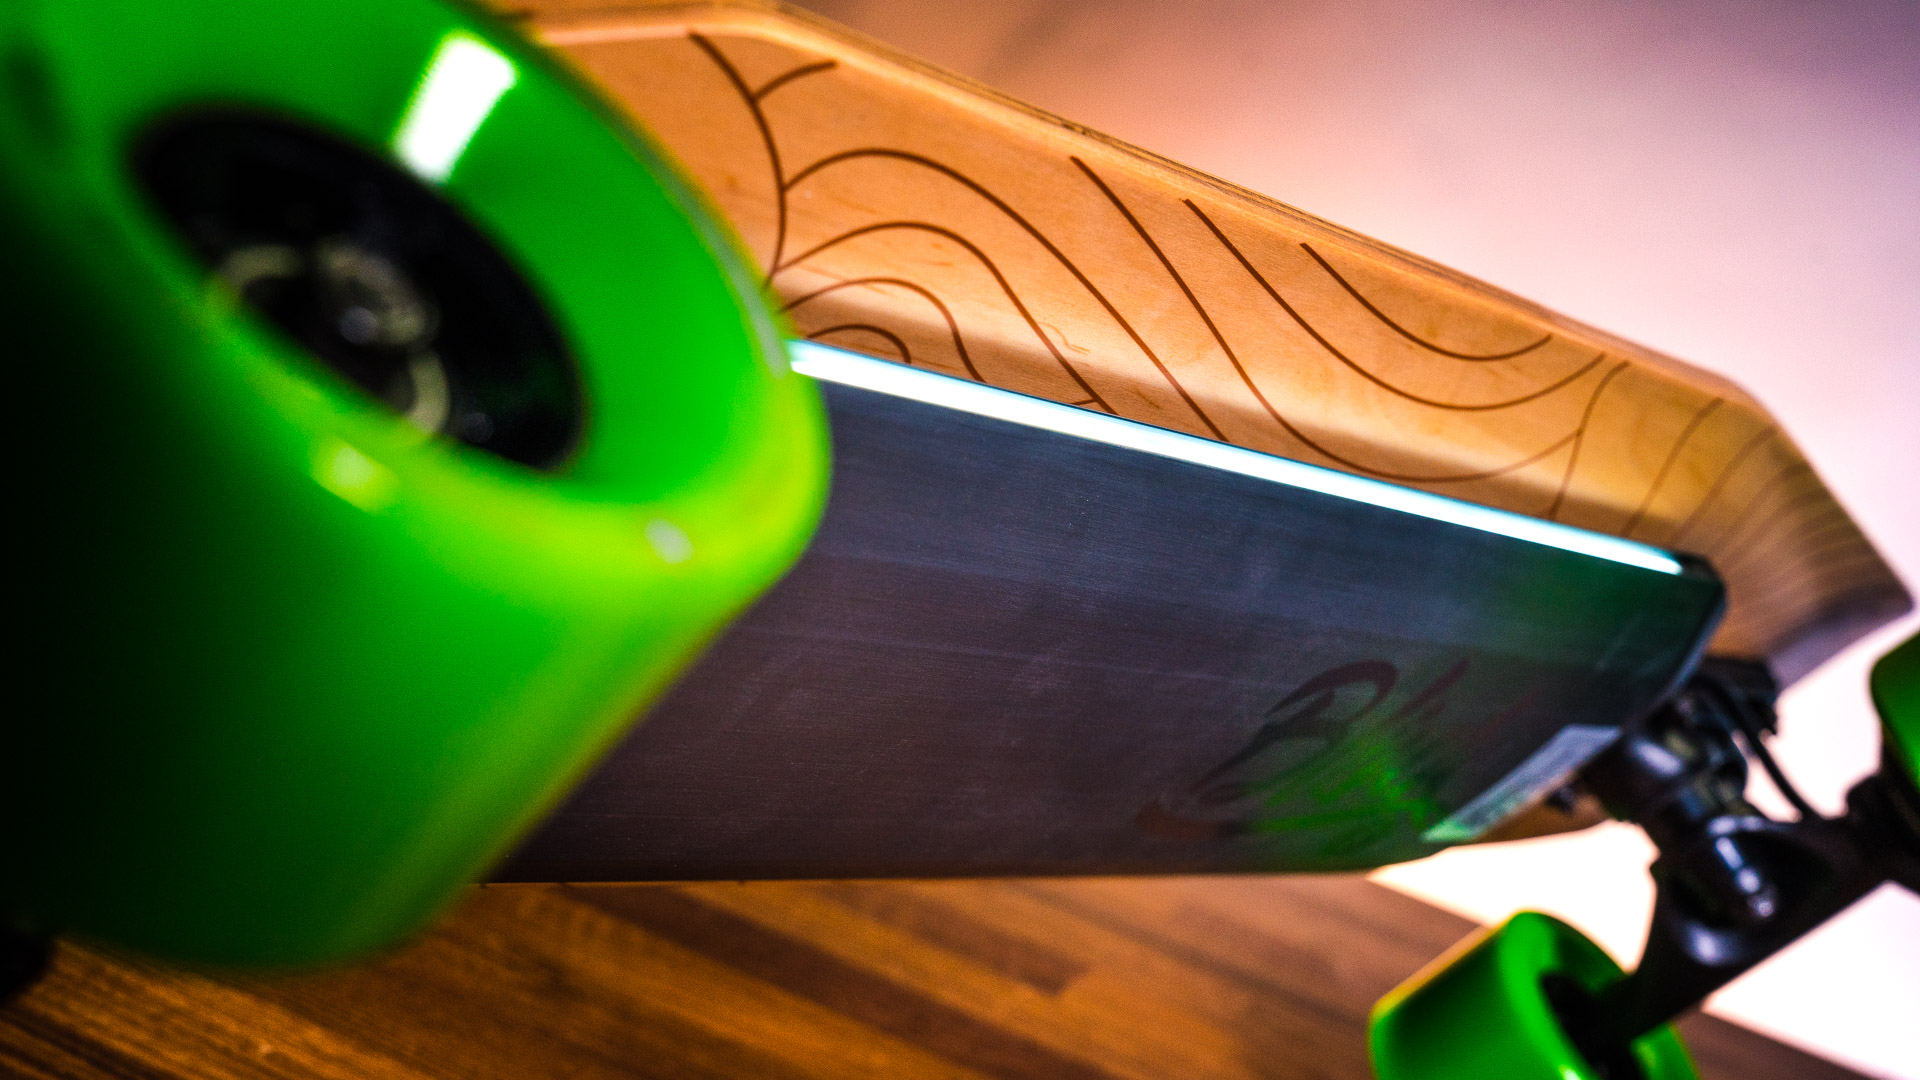 Electric skateboards are best suited for commuters who have connecting methods of transit, or short distances in urban areas. College students would also greatly benefit from having a zippy set of wheels underfoot, but there are a group of enthusiasts who want to push the limits and make an extreme sport of these boards.